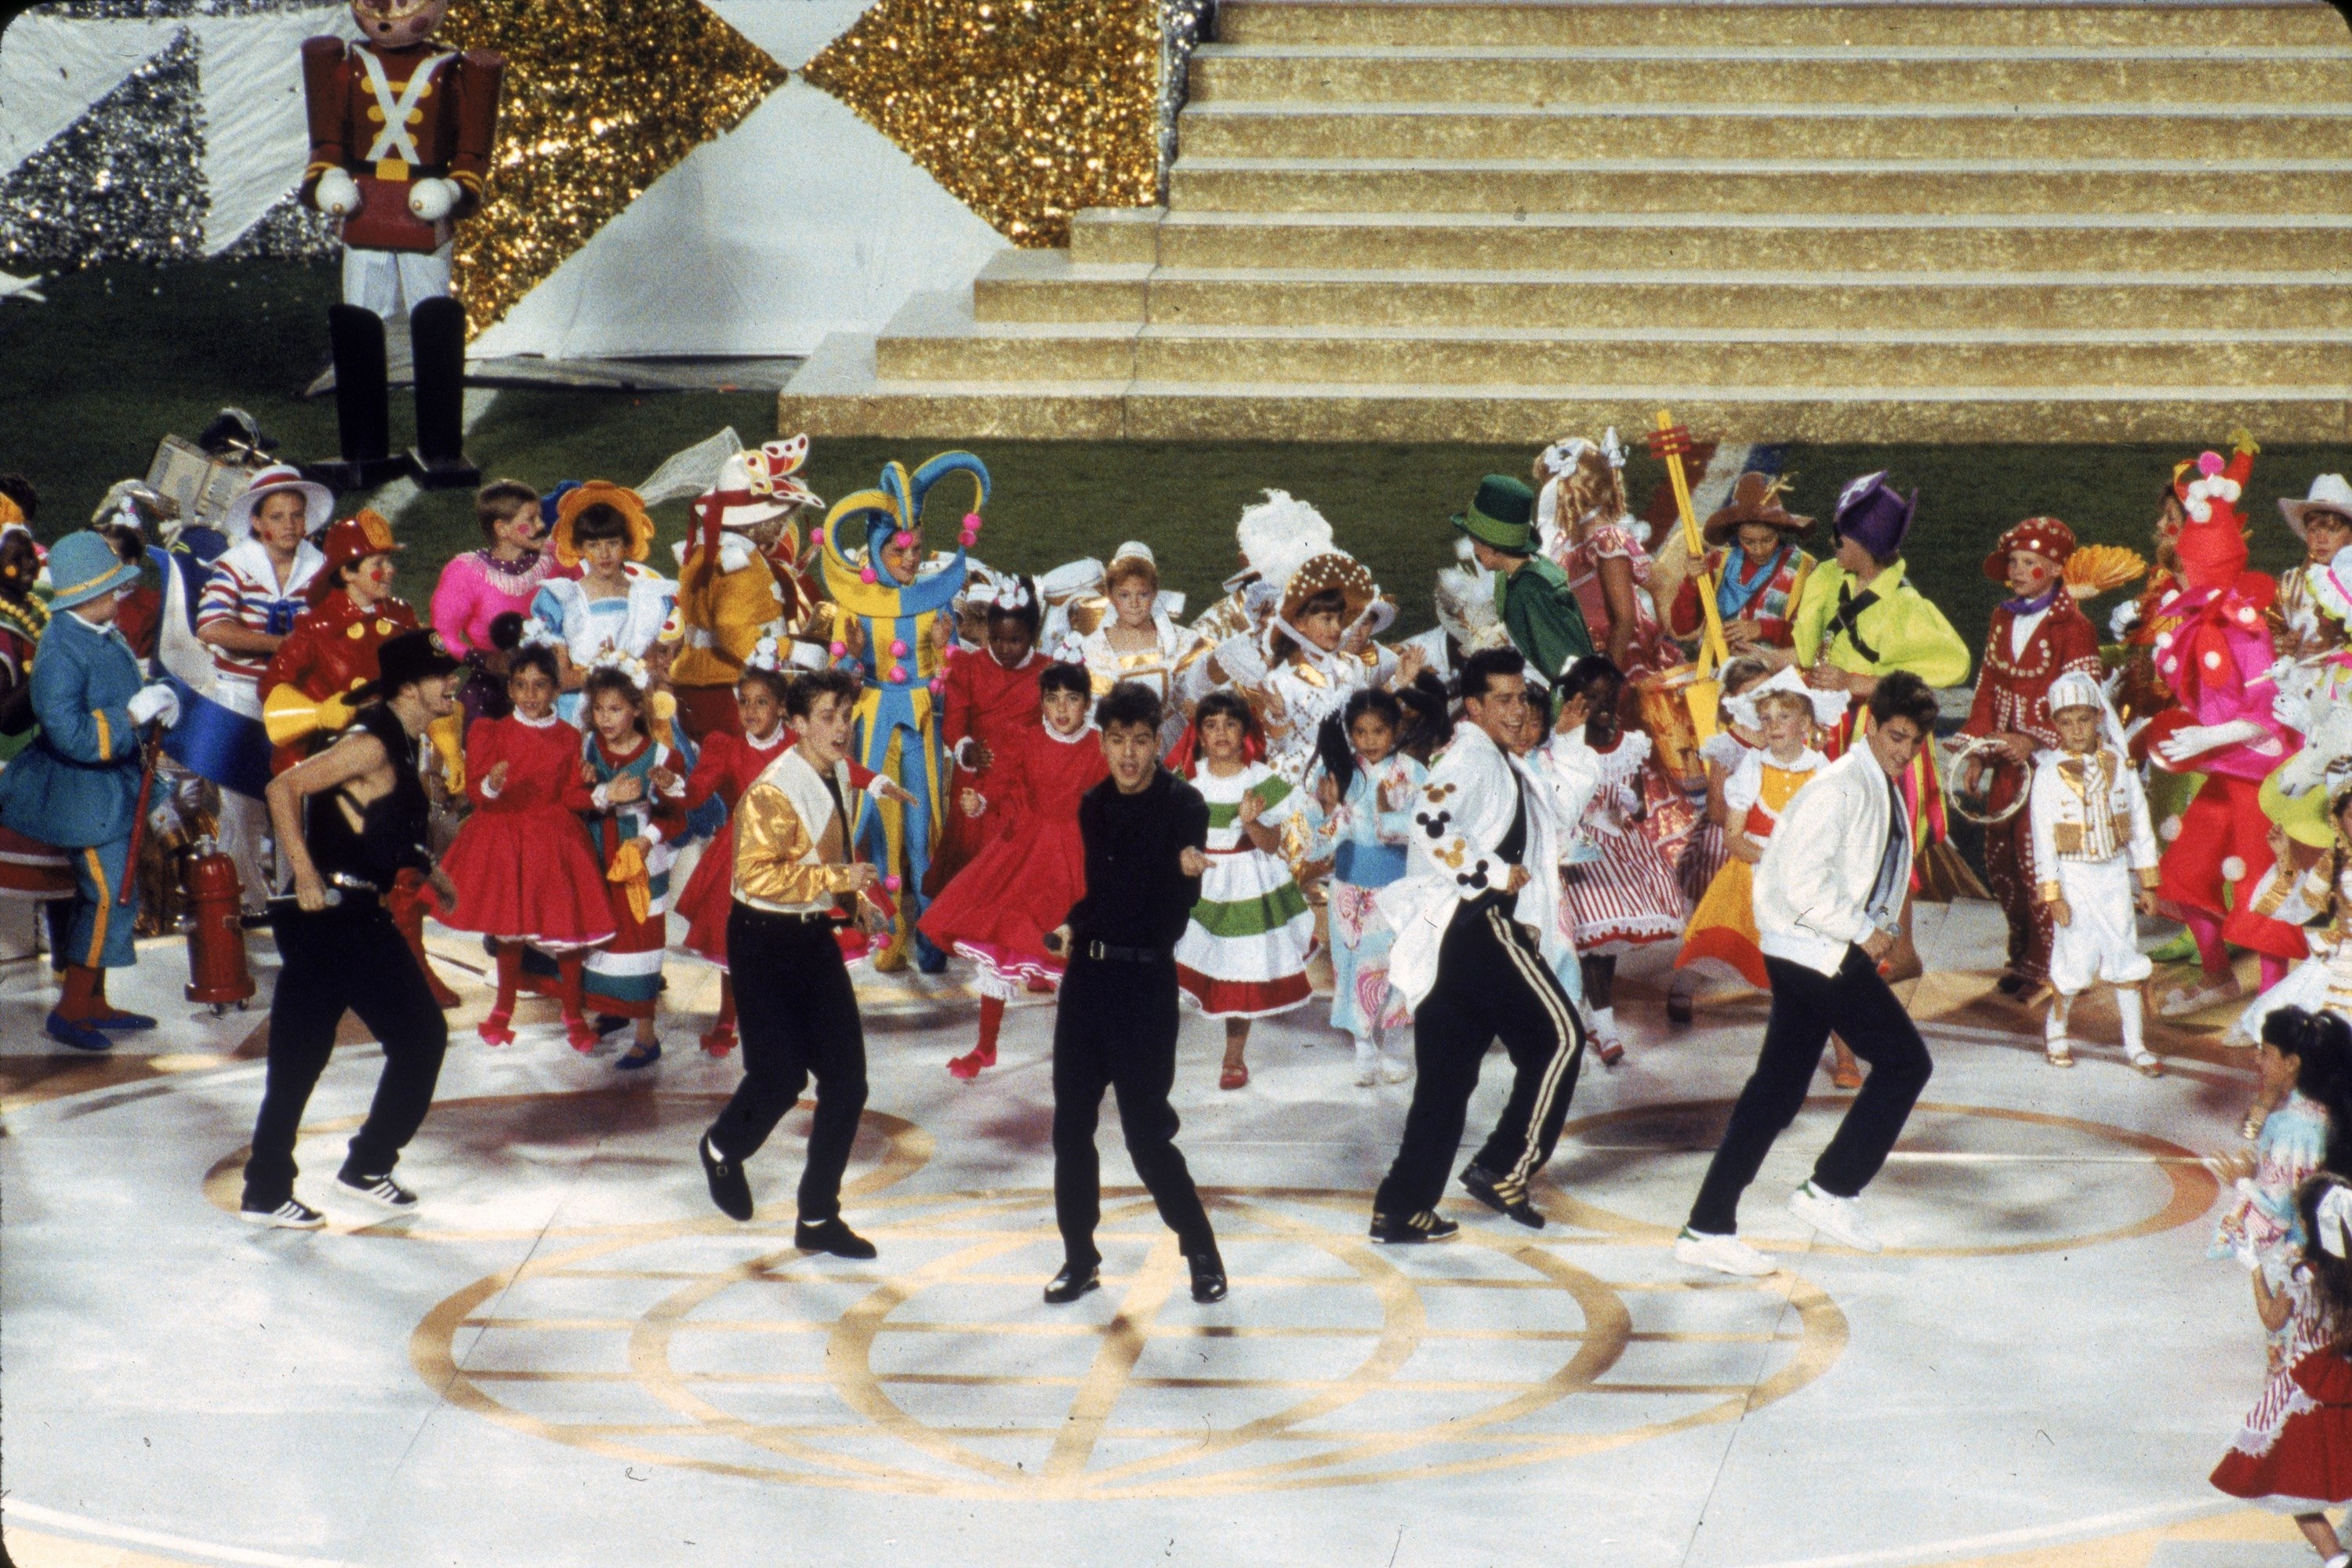 New Kids On The Block perform prior to the New York Giants taking on the Buffalo Bills in Super Bowl XXV